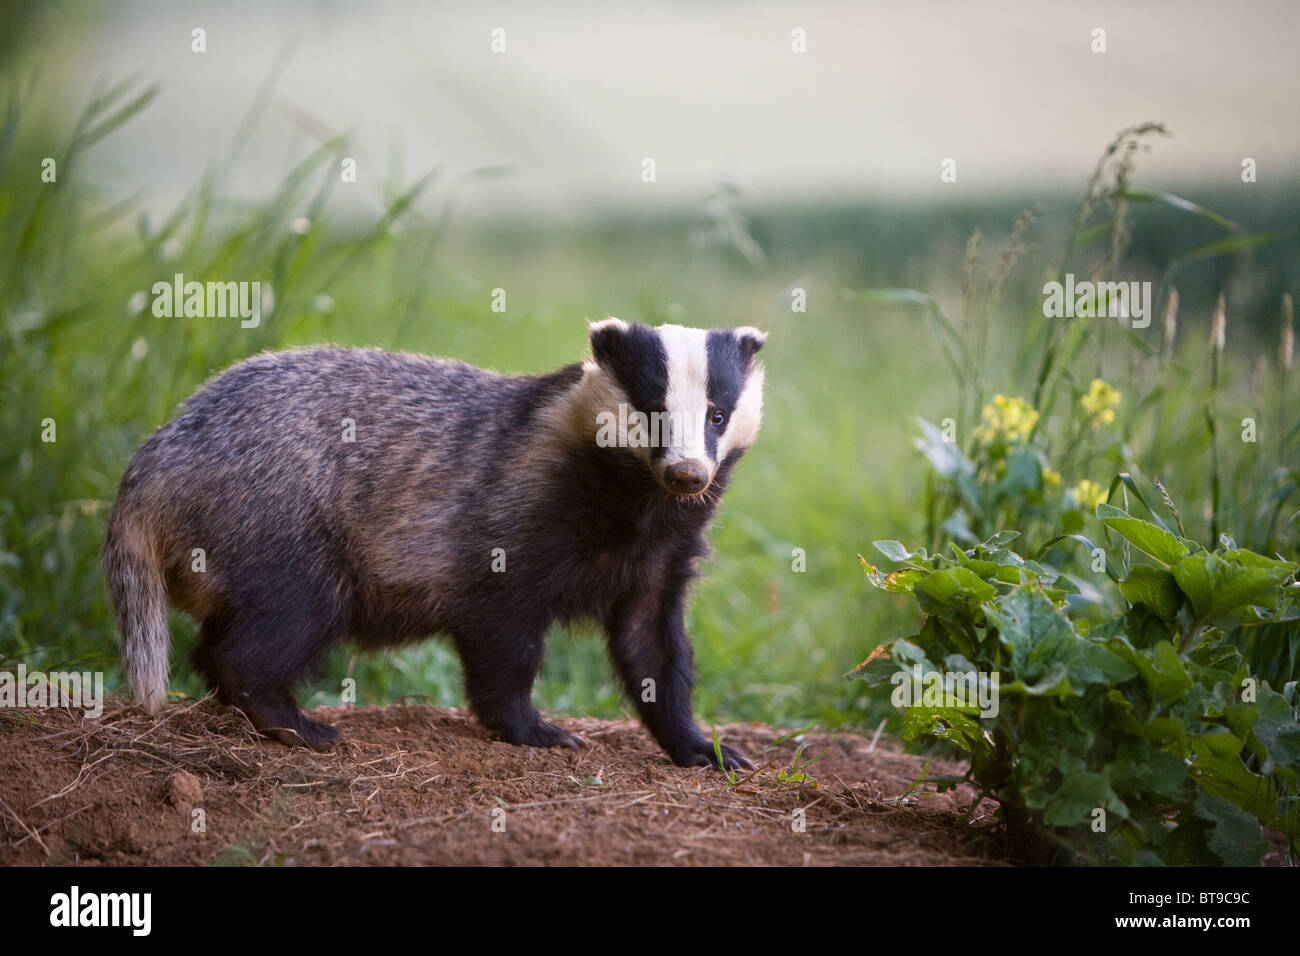 Badger (Meles meles) by the entrance to sett at the edge of a wood and a wheat field. Oxfordshire, England, June 2010. Stock Photo